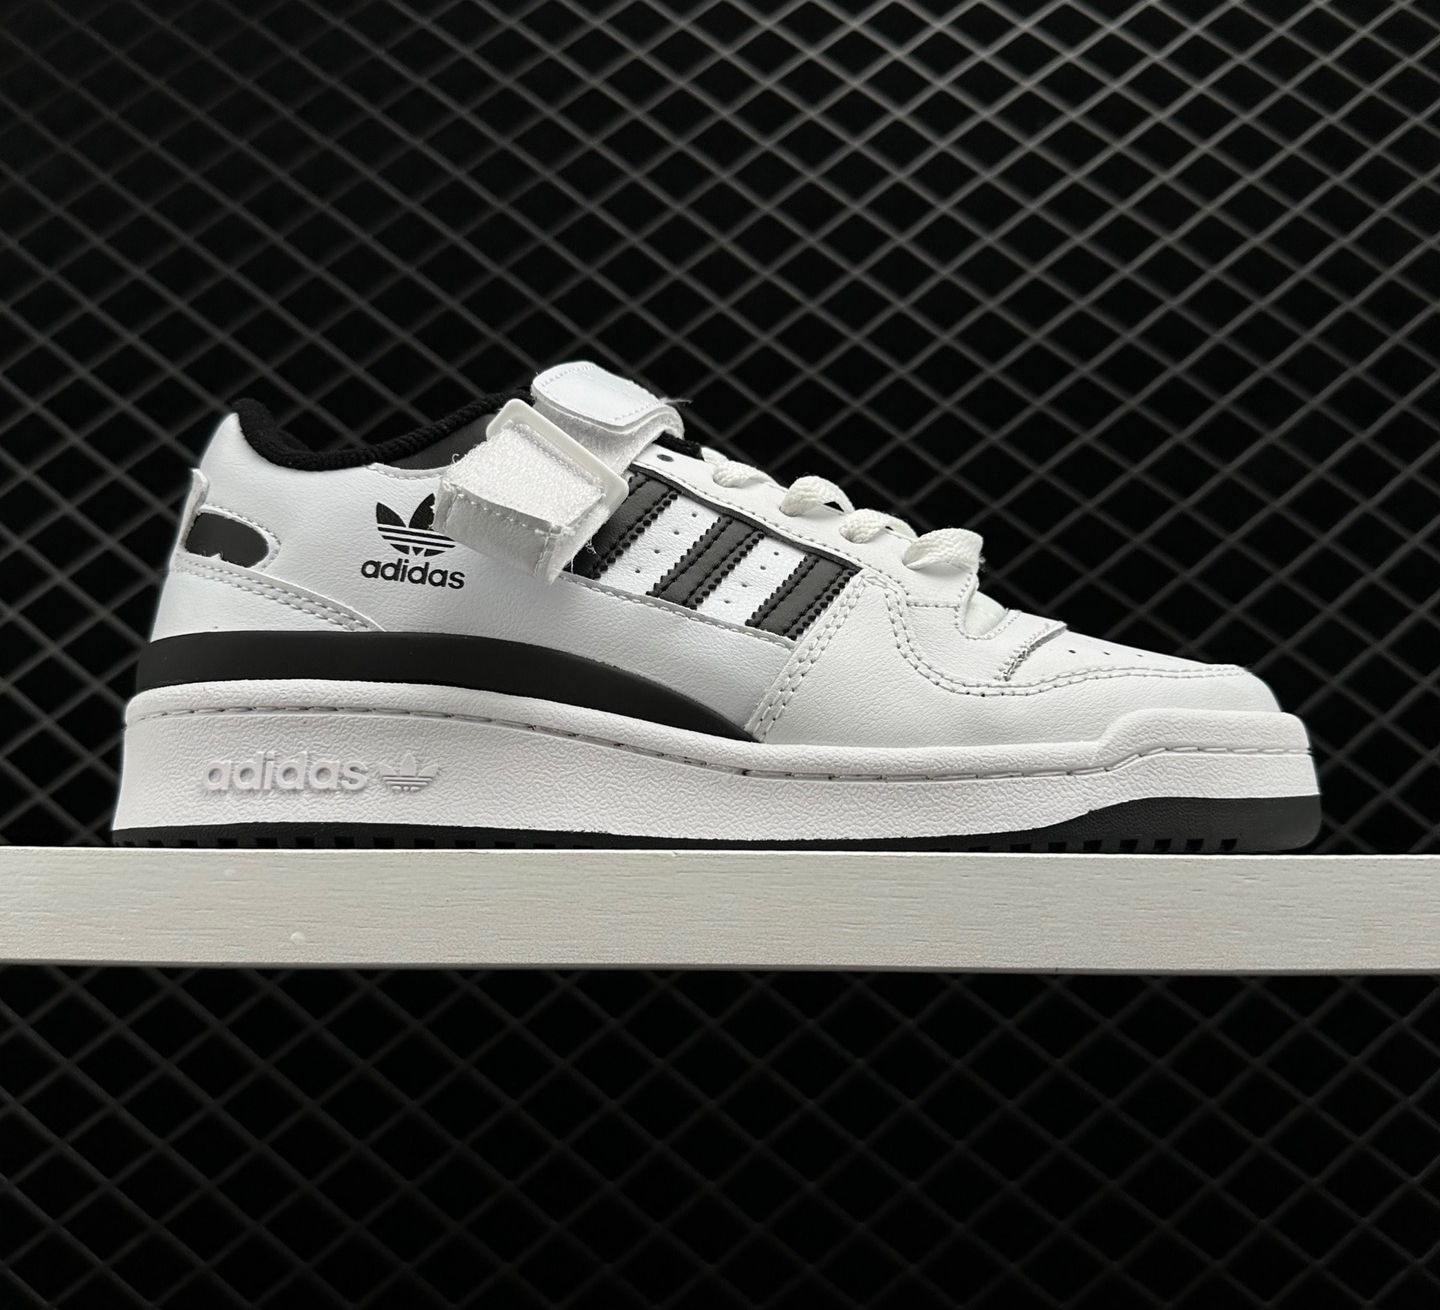 Adidas Forum Low 'White Black' FY7757 - Classic and Chic Footwear